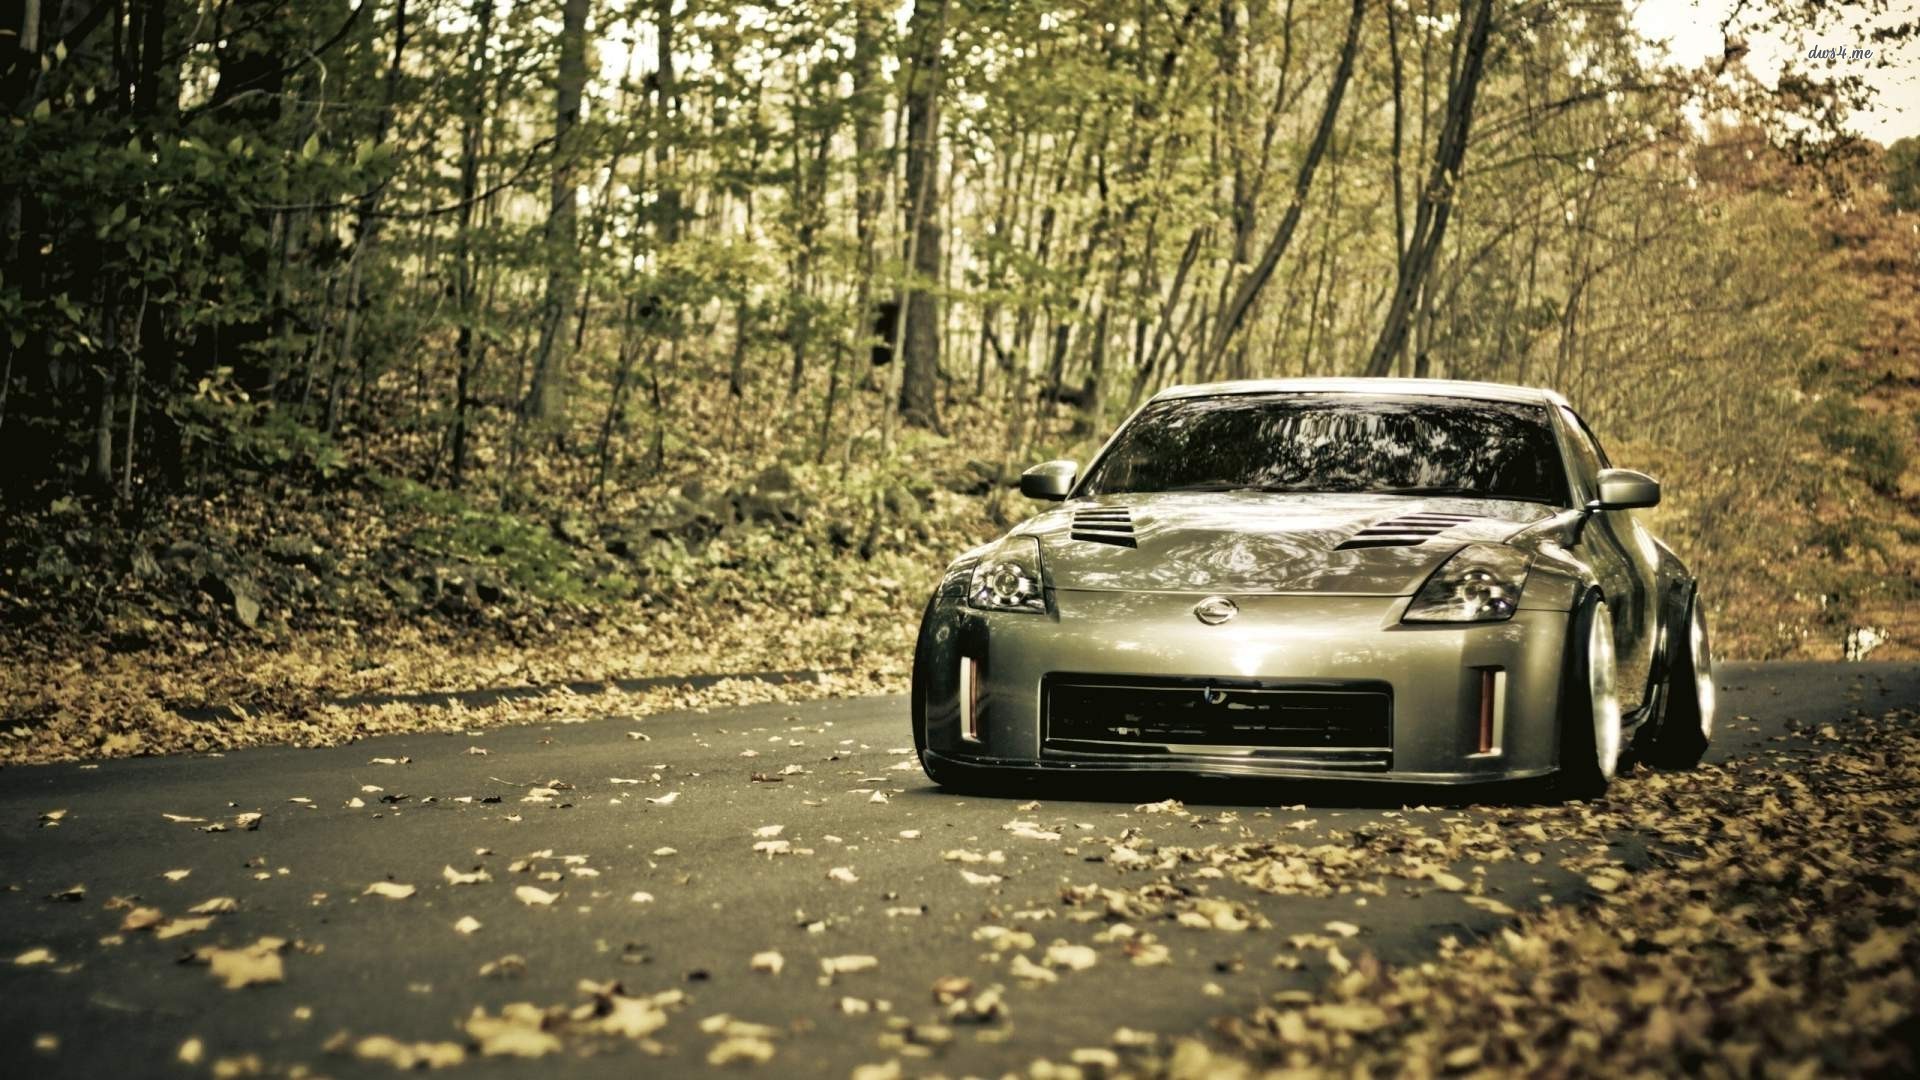 Nissan 350Z Wallpapers High Quality Download 1920x1080